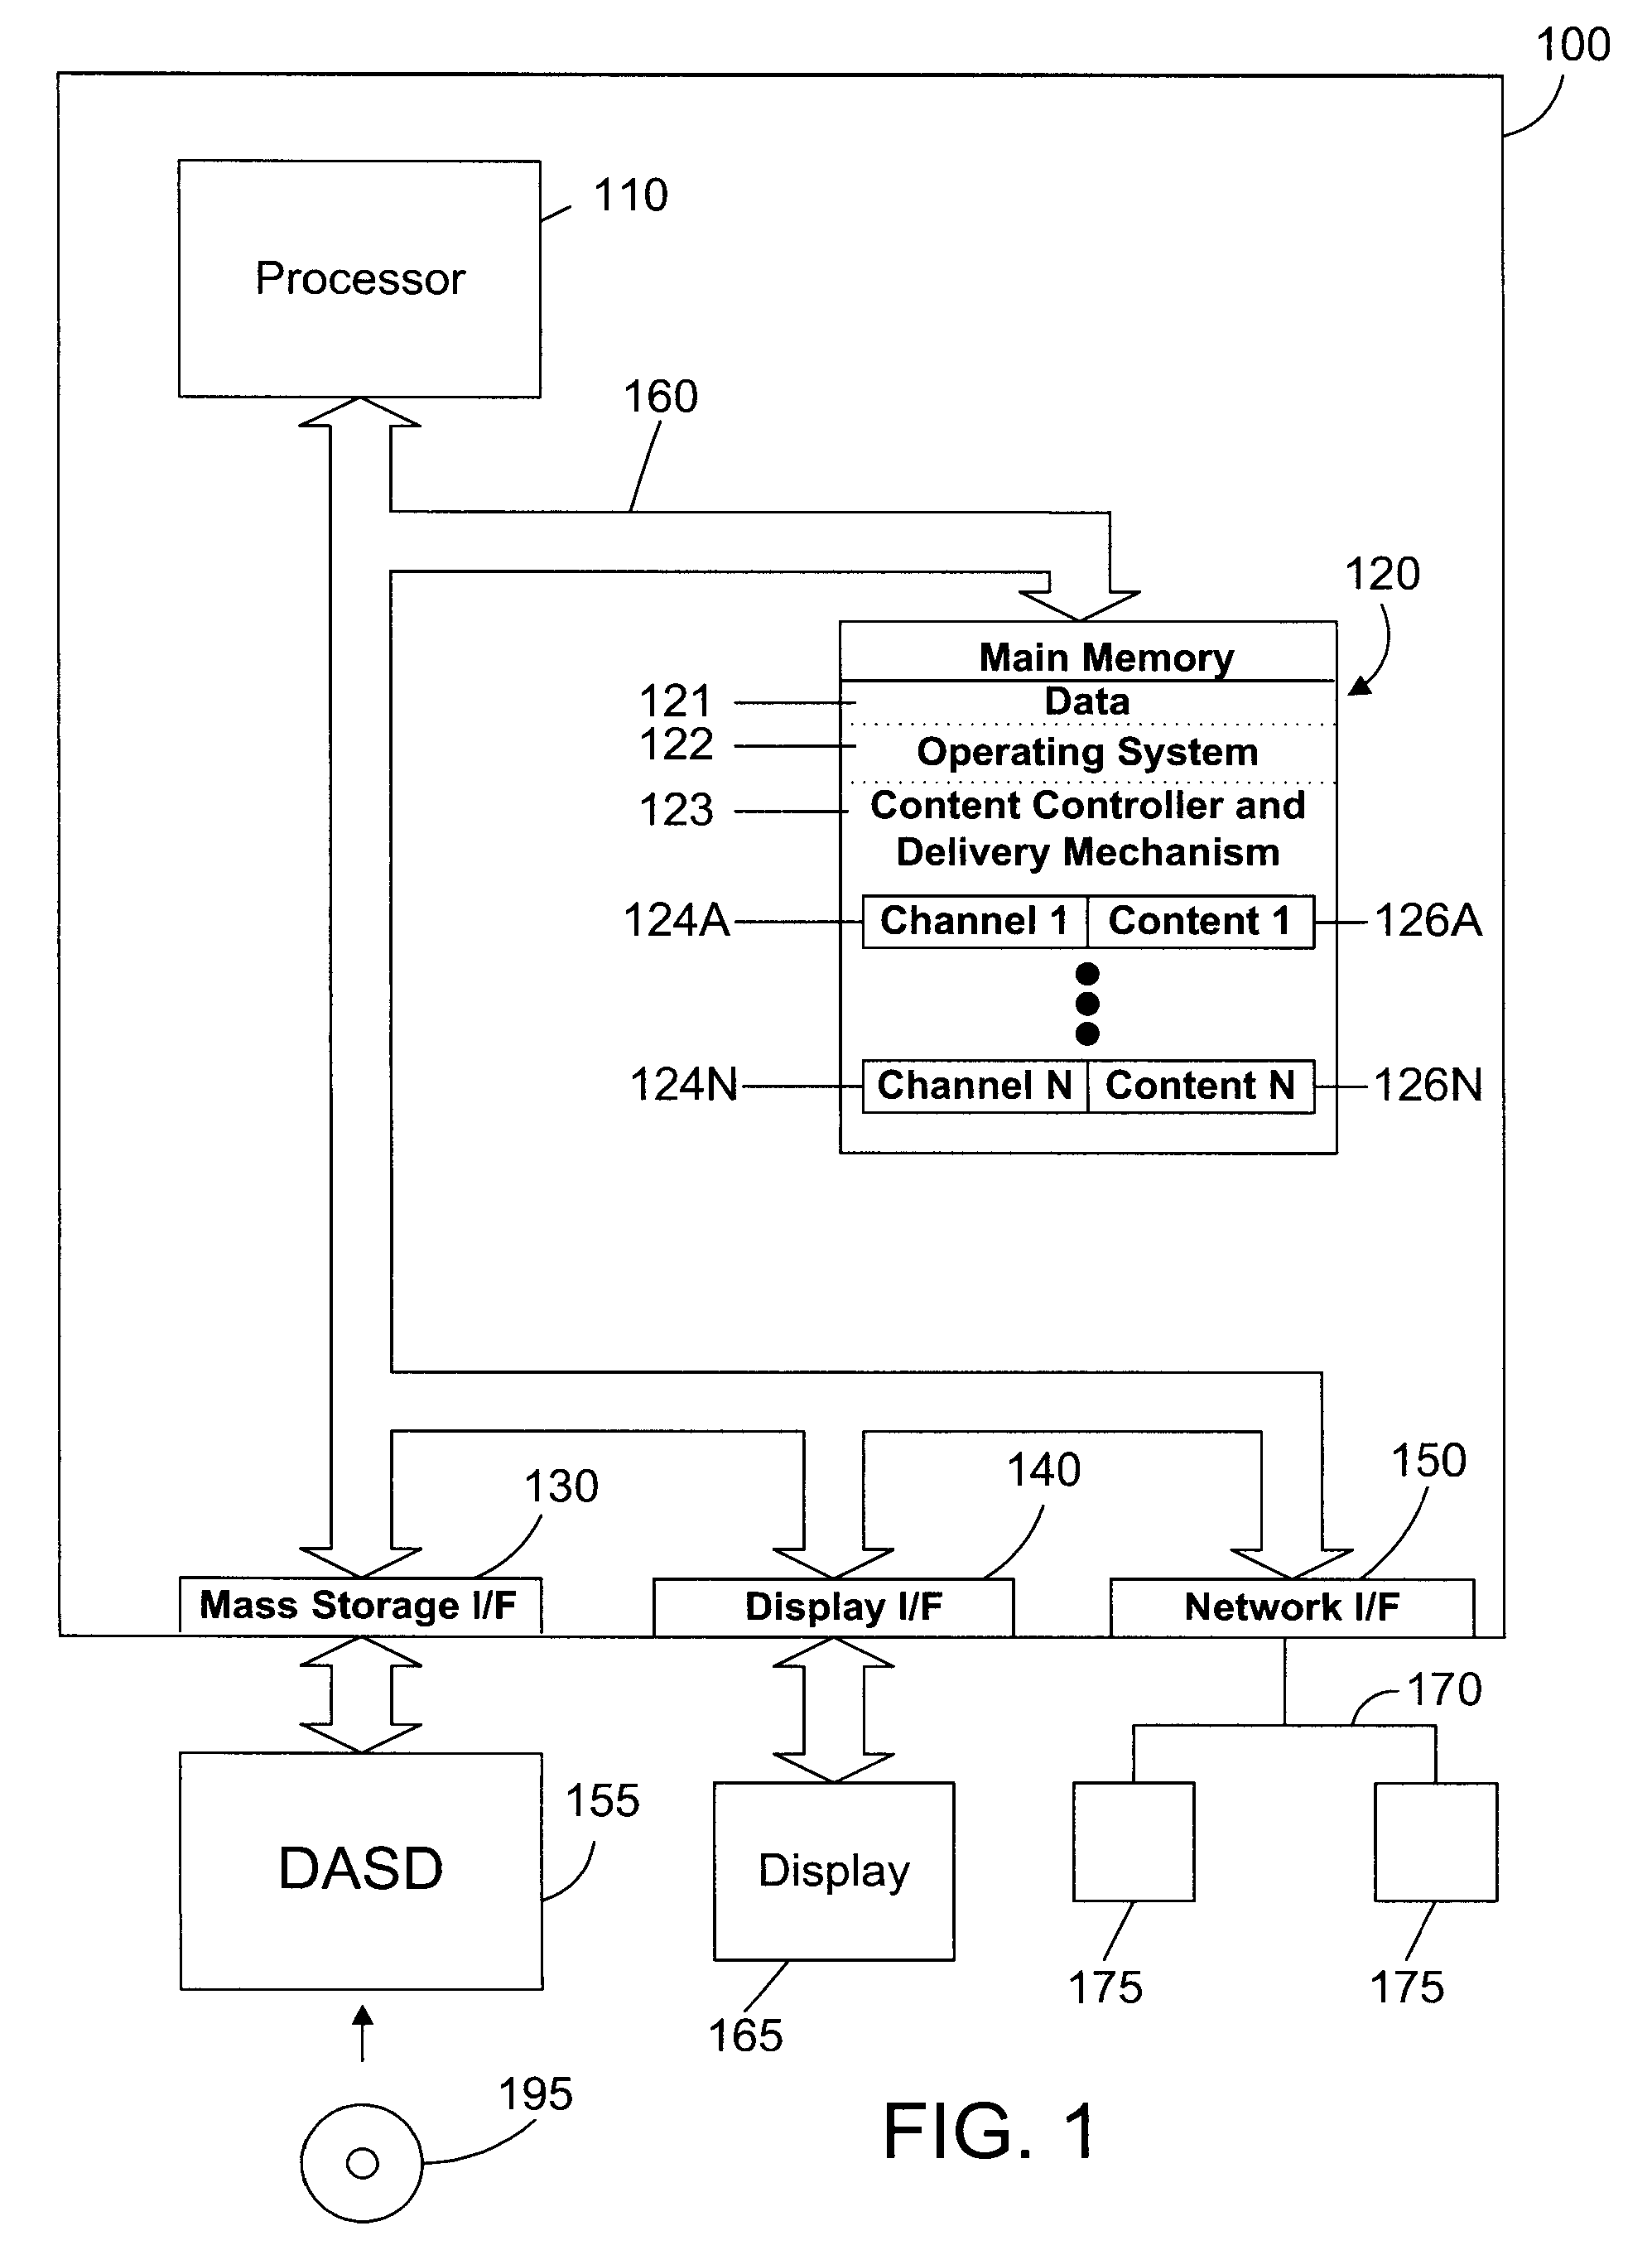 Apparatus and Method for Serving Digital Content Across Multiple Network Elements